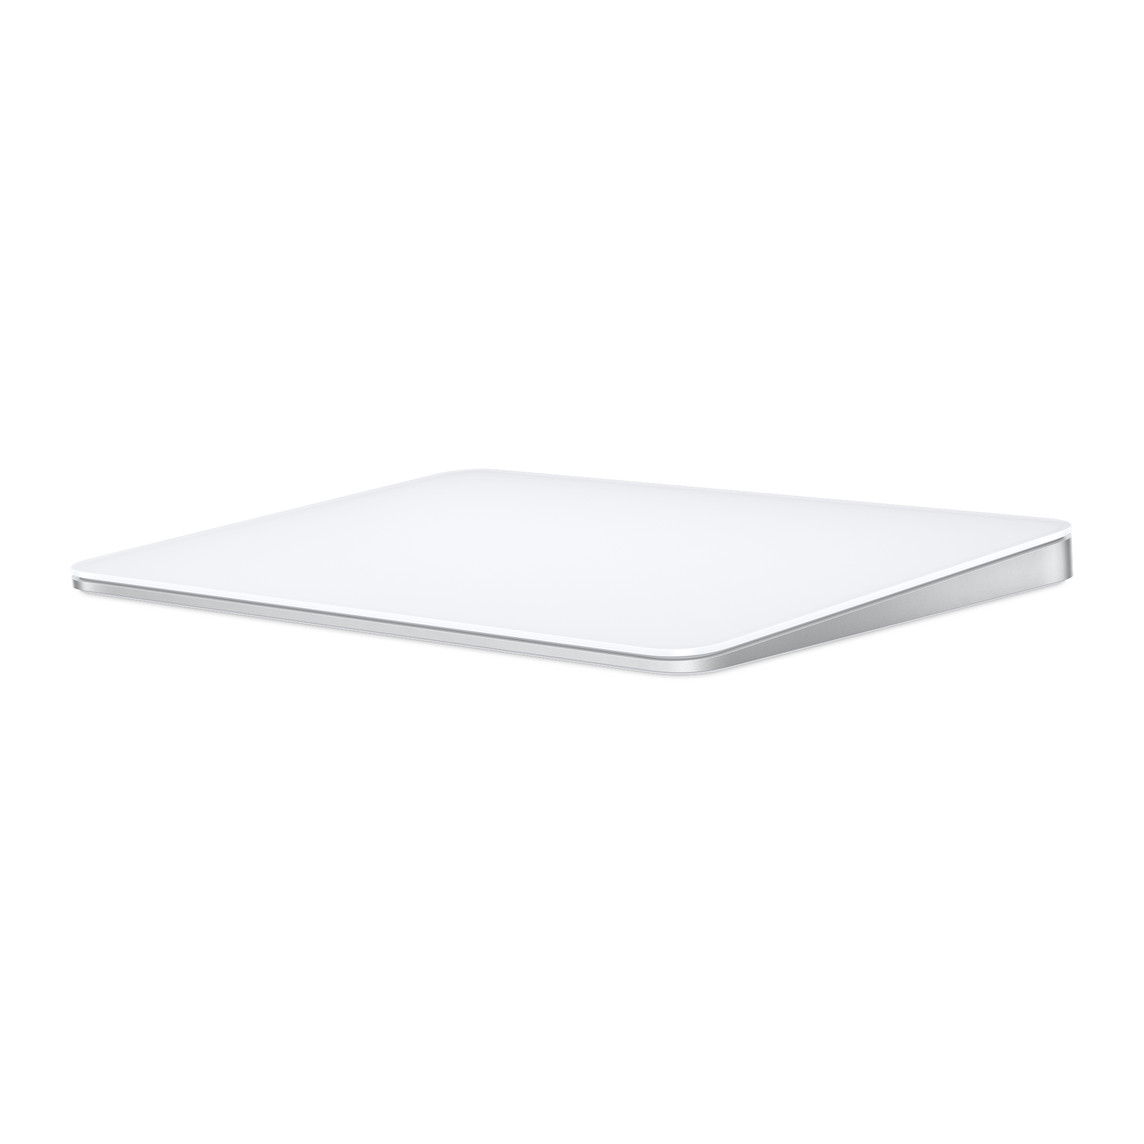 Picture of Apple Magic Trackpad - White Multi-Touch Surface